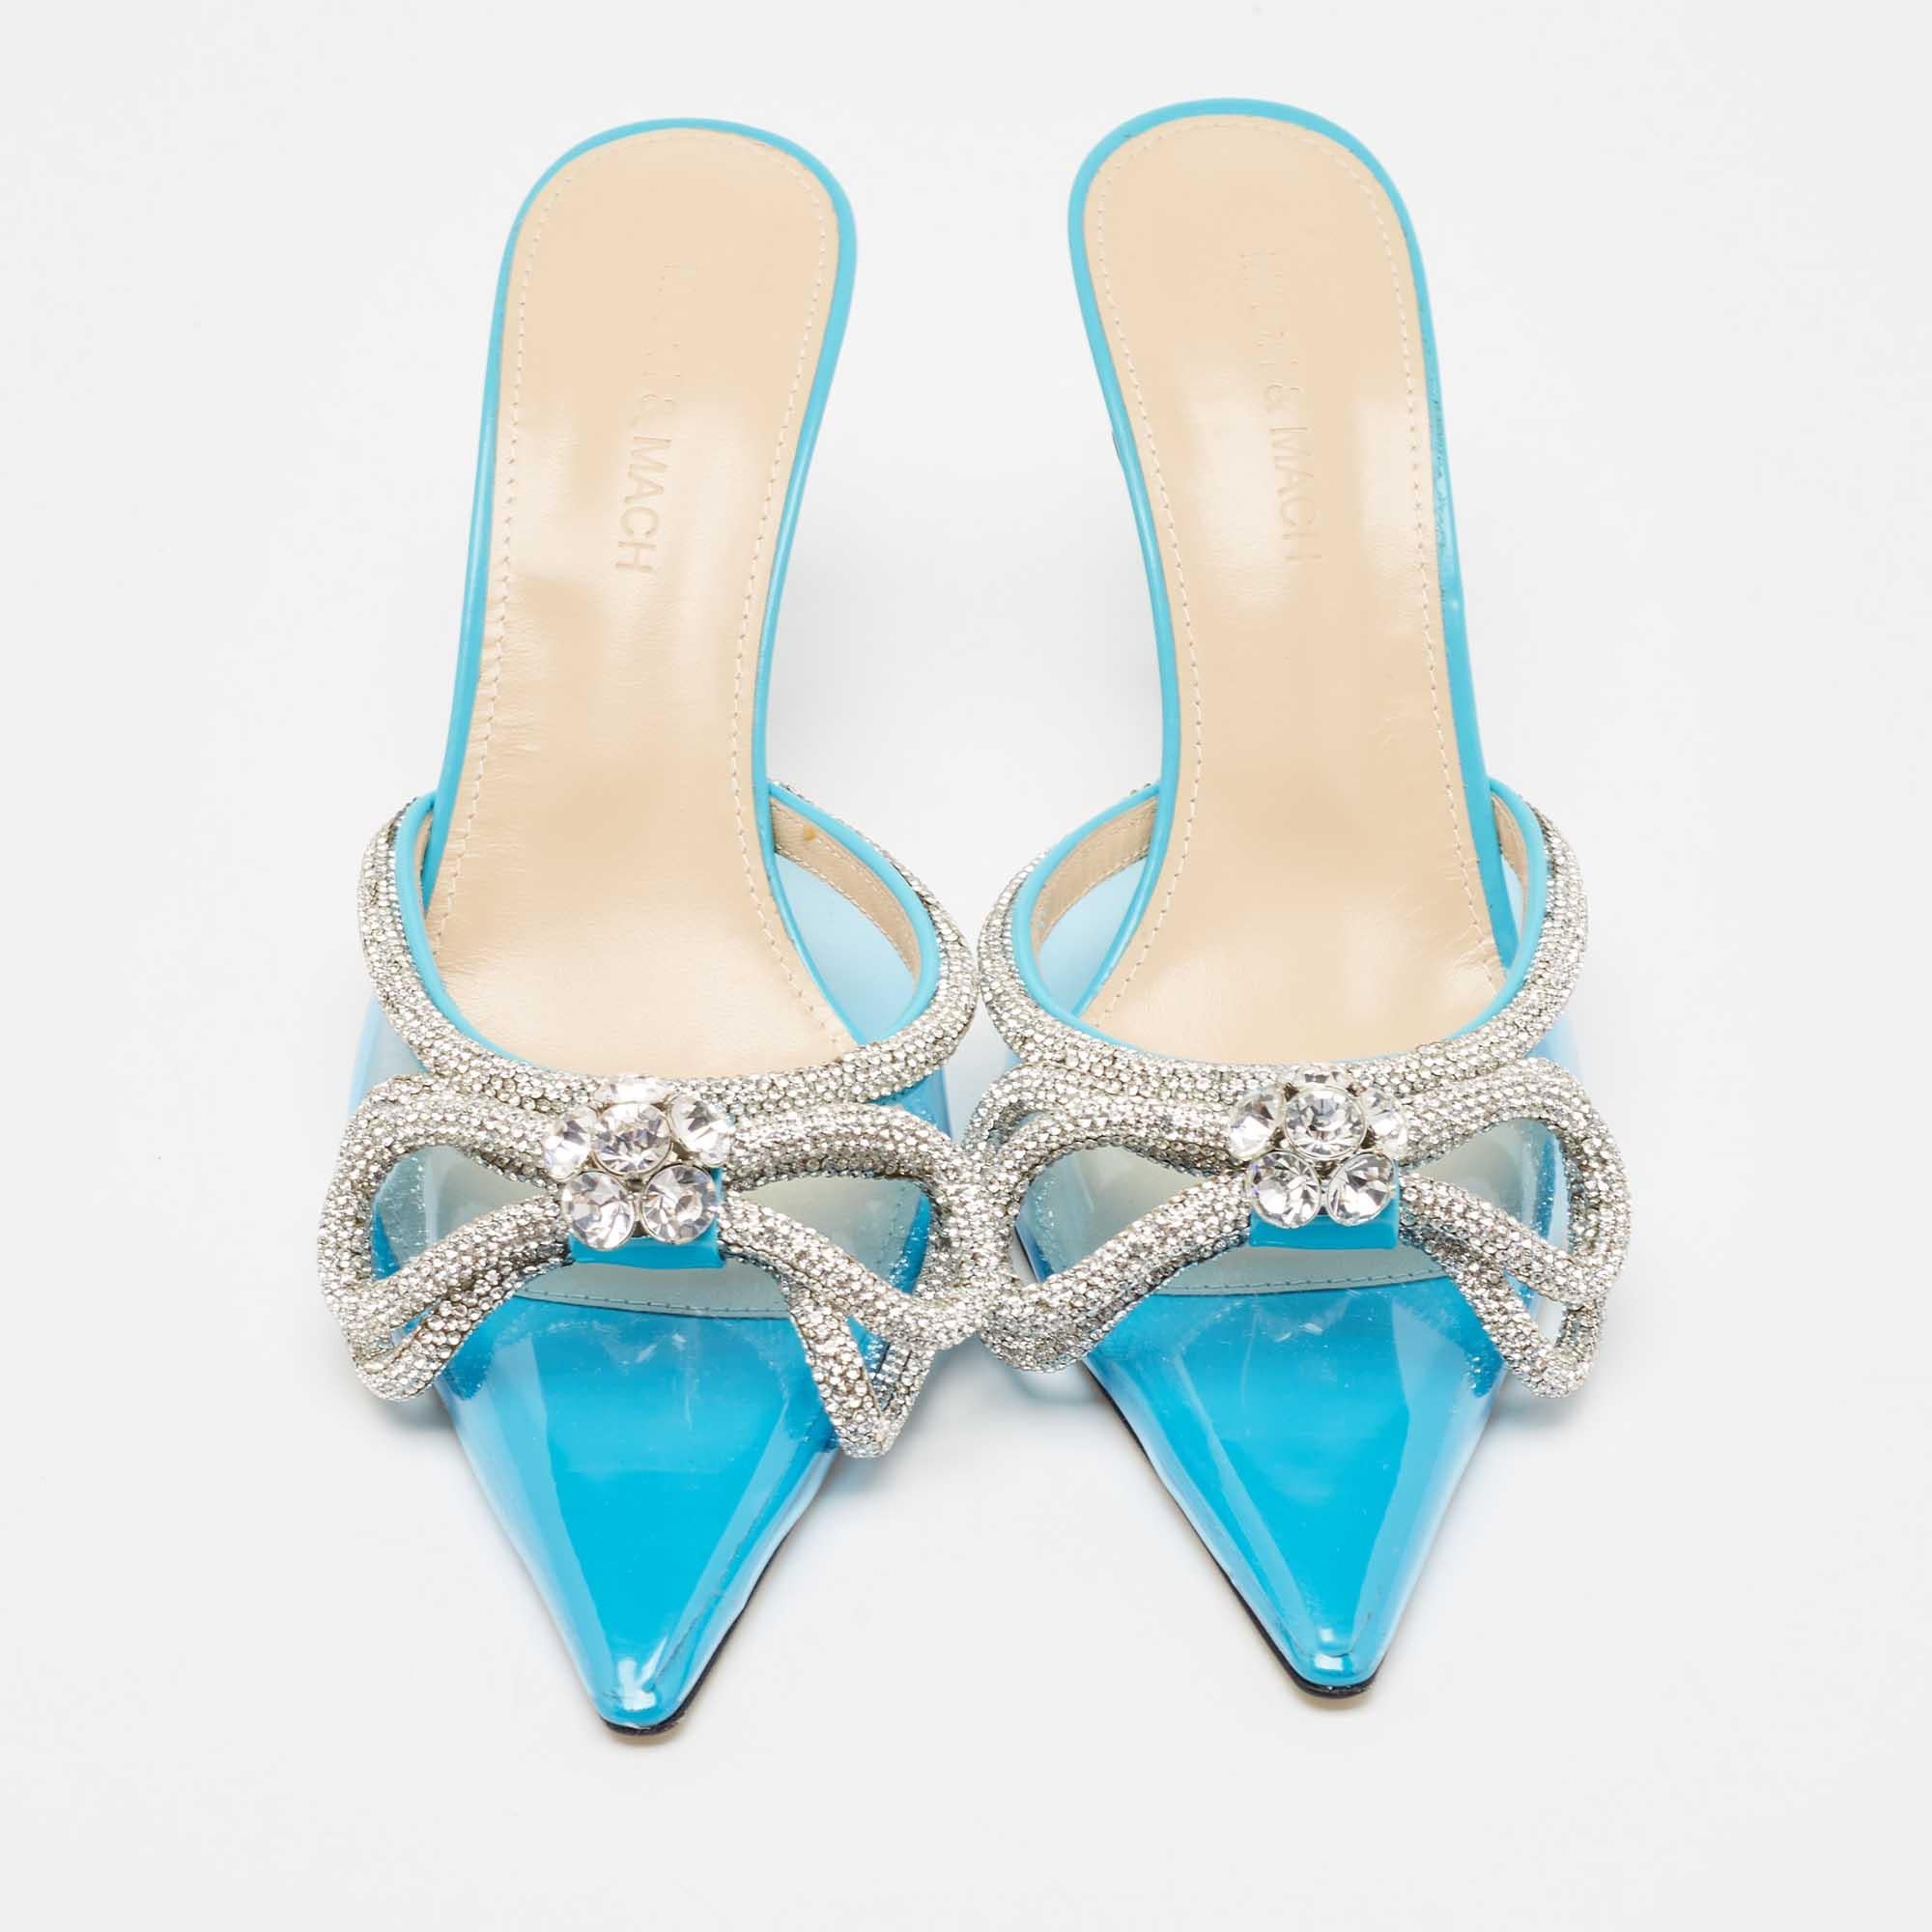 Add these regal Mach & Mach mules to your closet and be glamorously ready for those special parties and events. Constructed from PVC, these pointed-toe pumps feature double bow crystal embellishments on the front, along with low heels and a slip-on